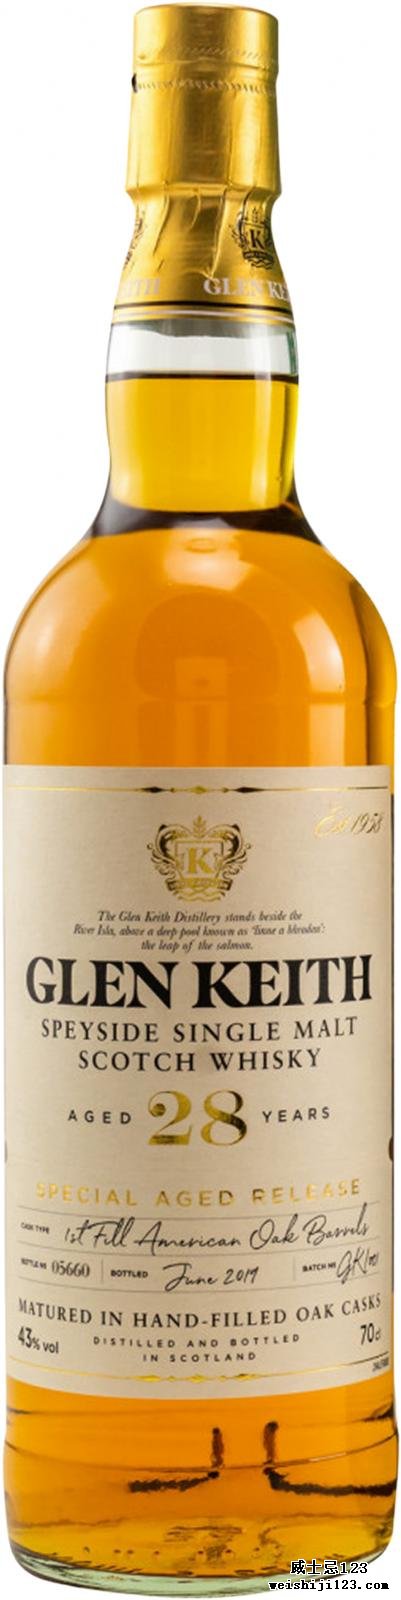 Glen Keith 28-year-old